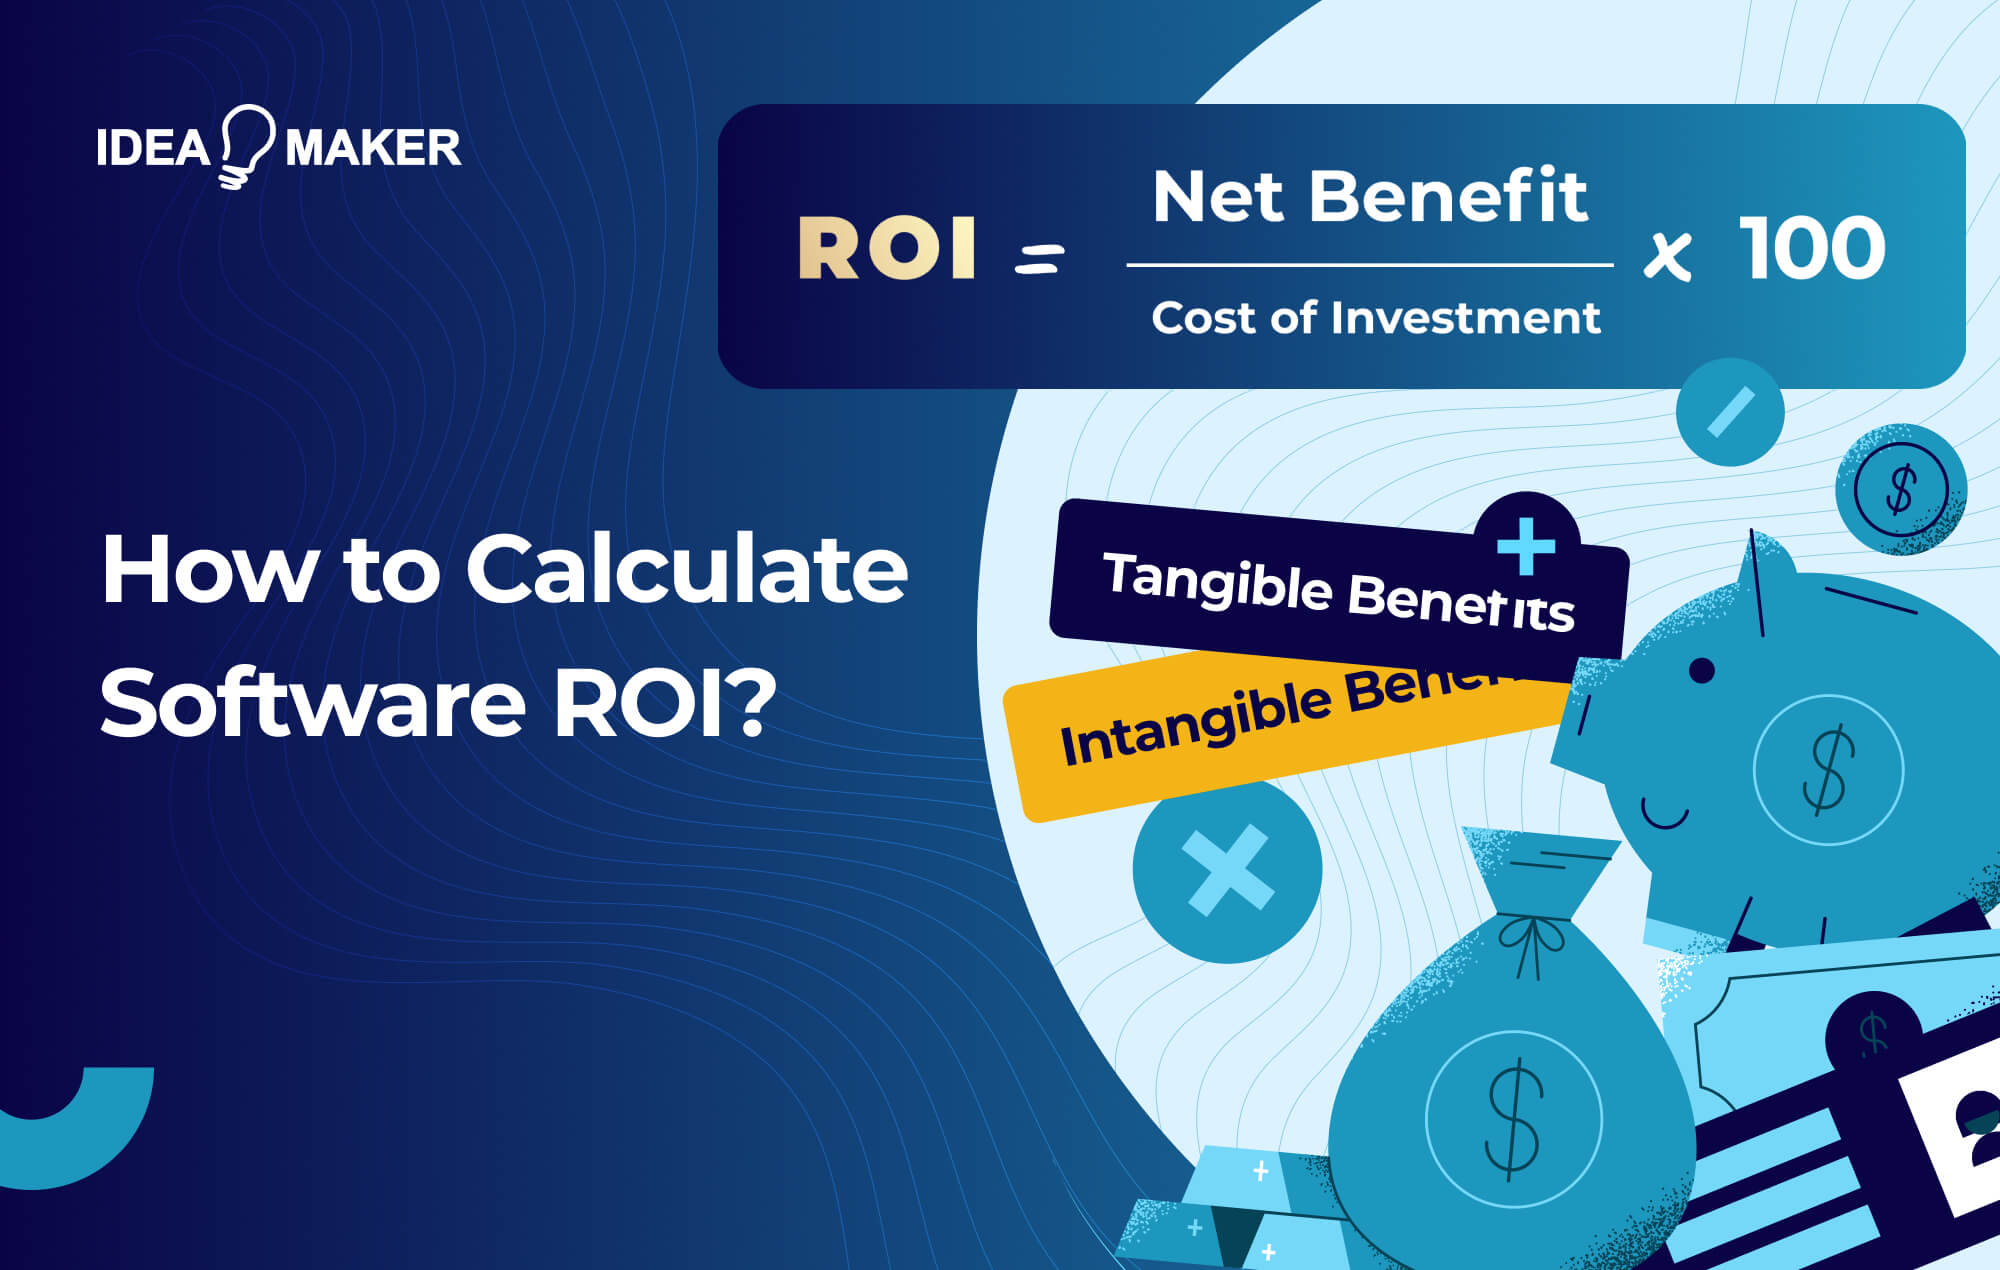 Ideamaker - How to Calculate Software ROI_